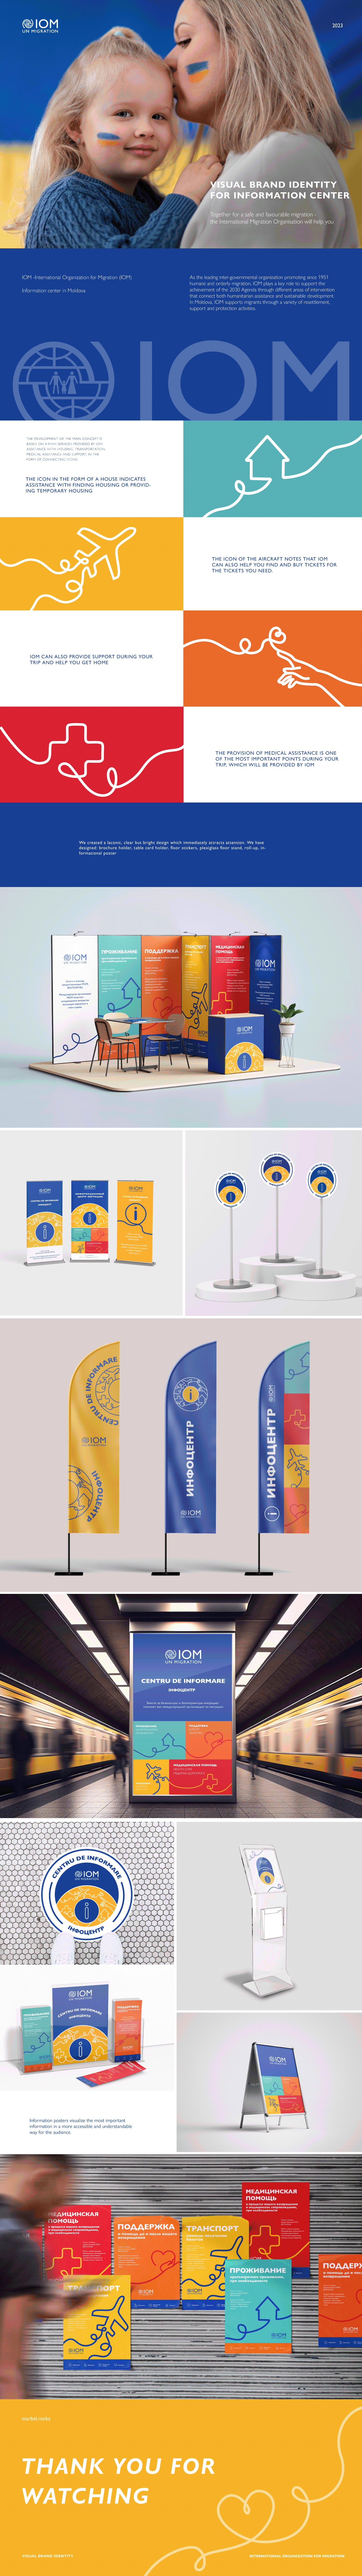 adobe illustrator brand identity charity infographic marketing   NGO Poster Design print social campaign United Nations